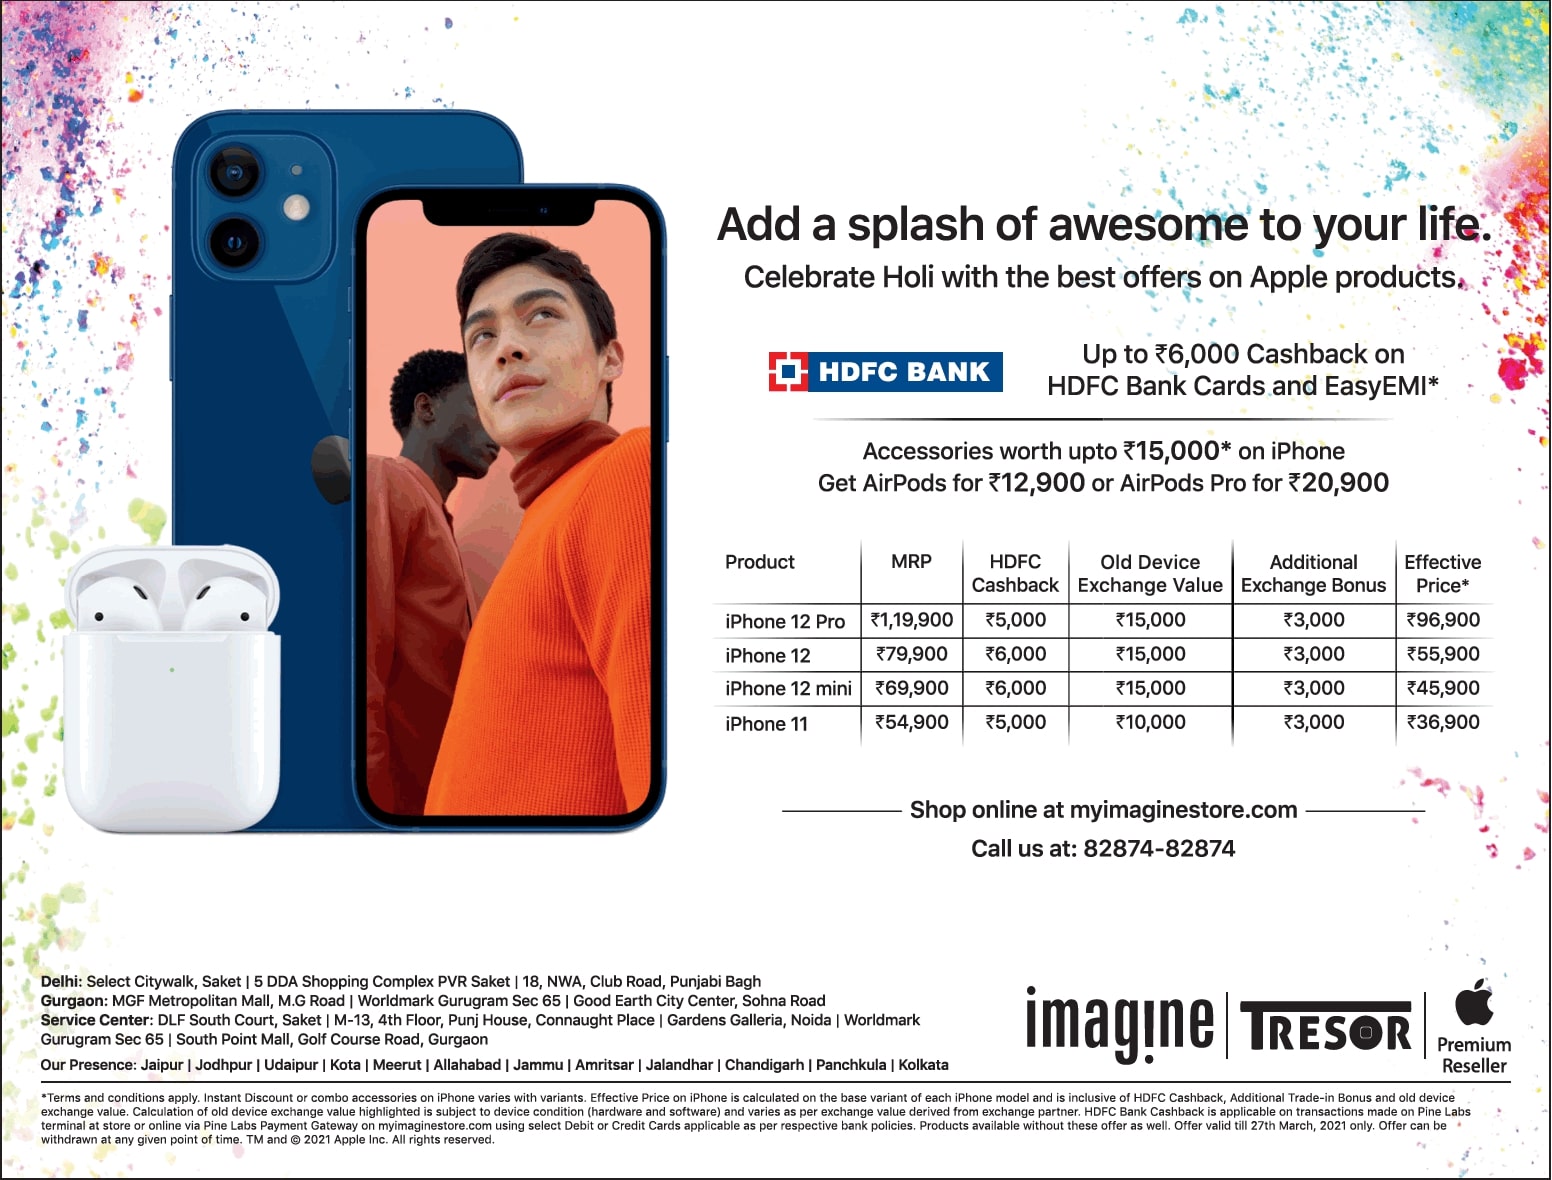 iphone-hdfc- bank-offer-up-to-rupees-6000-cashback-ad-delhi-times-21-03-2021